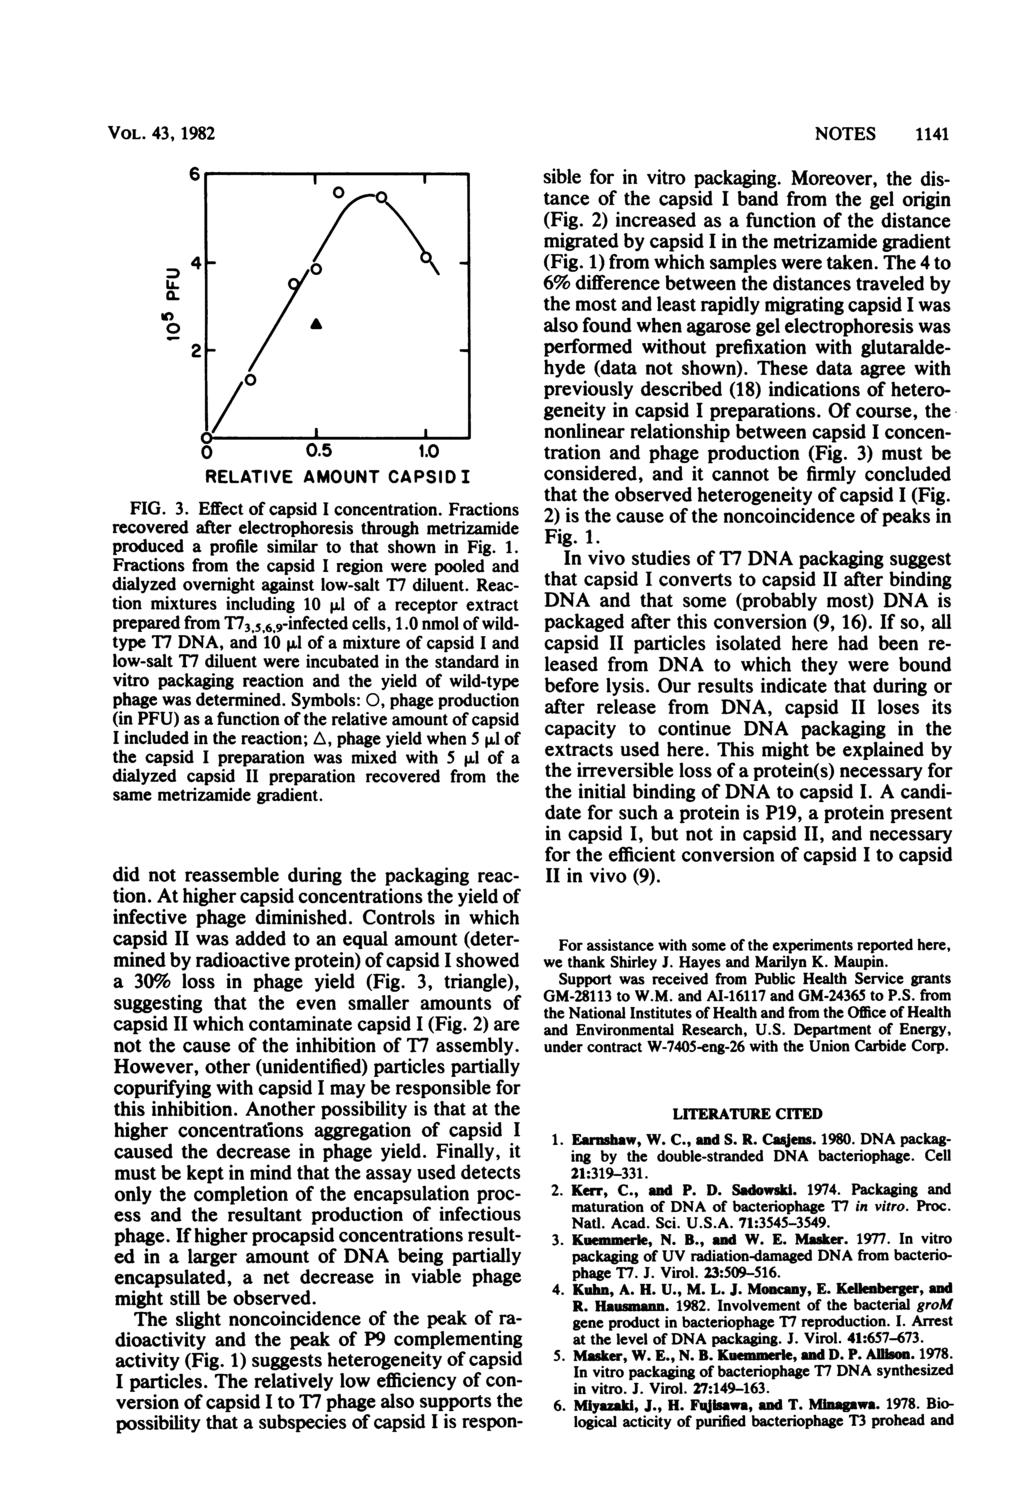 VOL. 43, 1982 a. 4 I / A FIG. 3. Effect of capsid I concentration. Fractions recovered after electrophoresis through metrizamide produced a profile similar to that shown in Fig. 1. Fractions from the capsid I region were pooled and dialyzed overnight against low-salt 17 diluent.